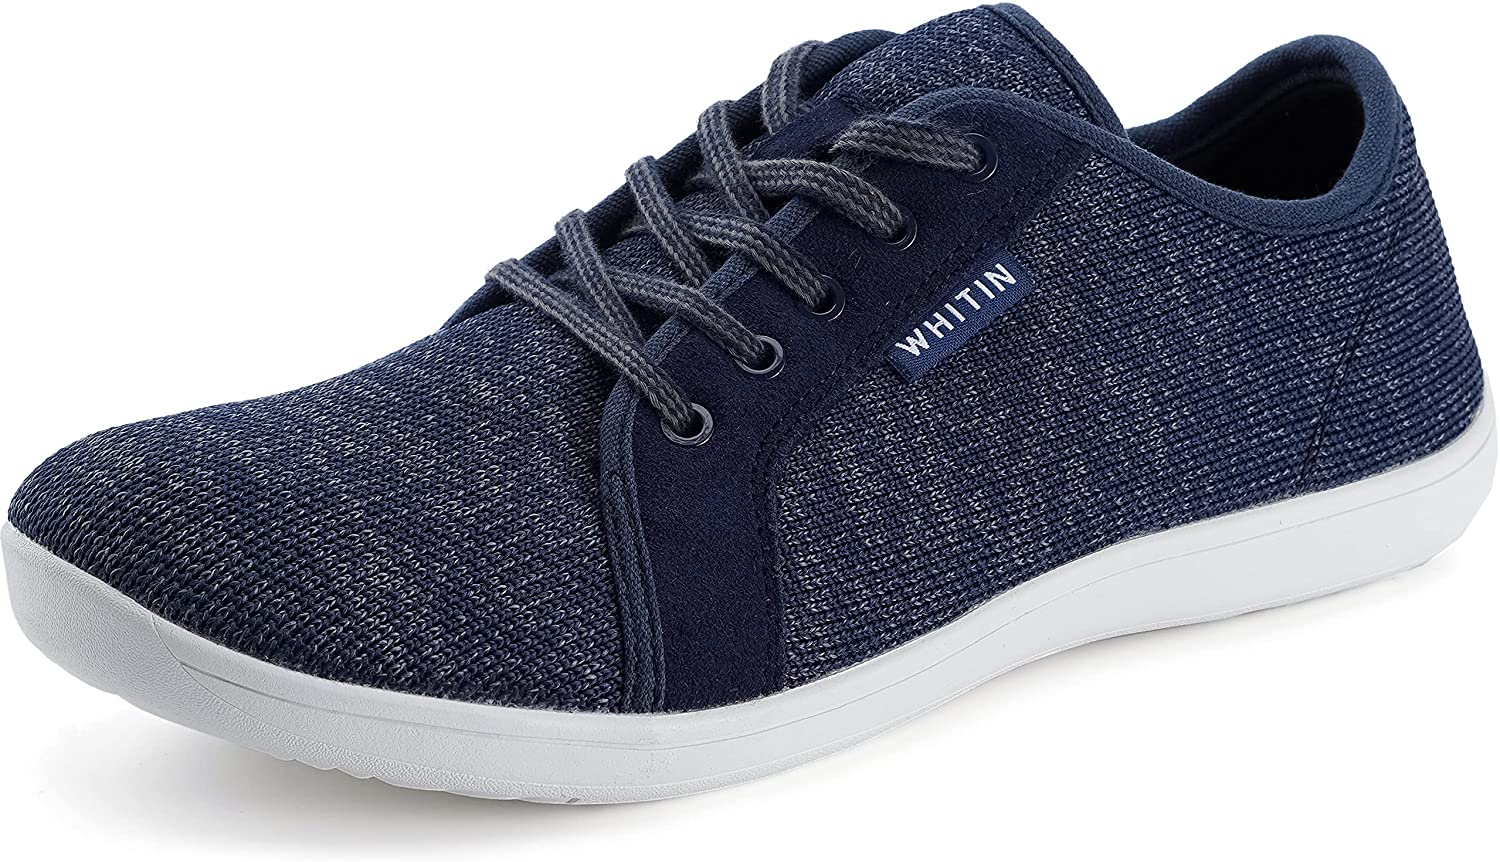 WHITIN Women's Knit Barefoot Minimalist Sneakers Lace Up Wide Fit